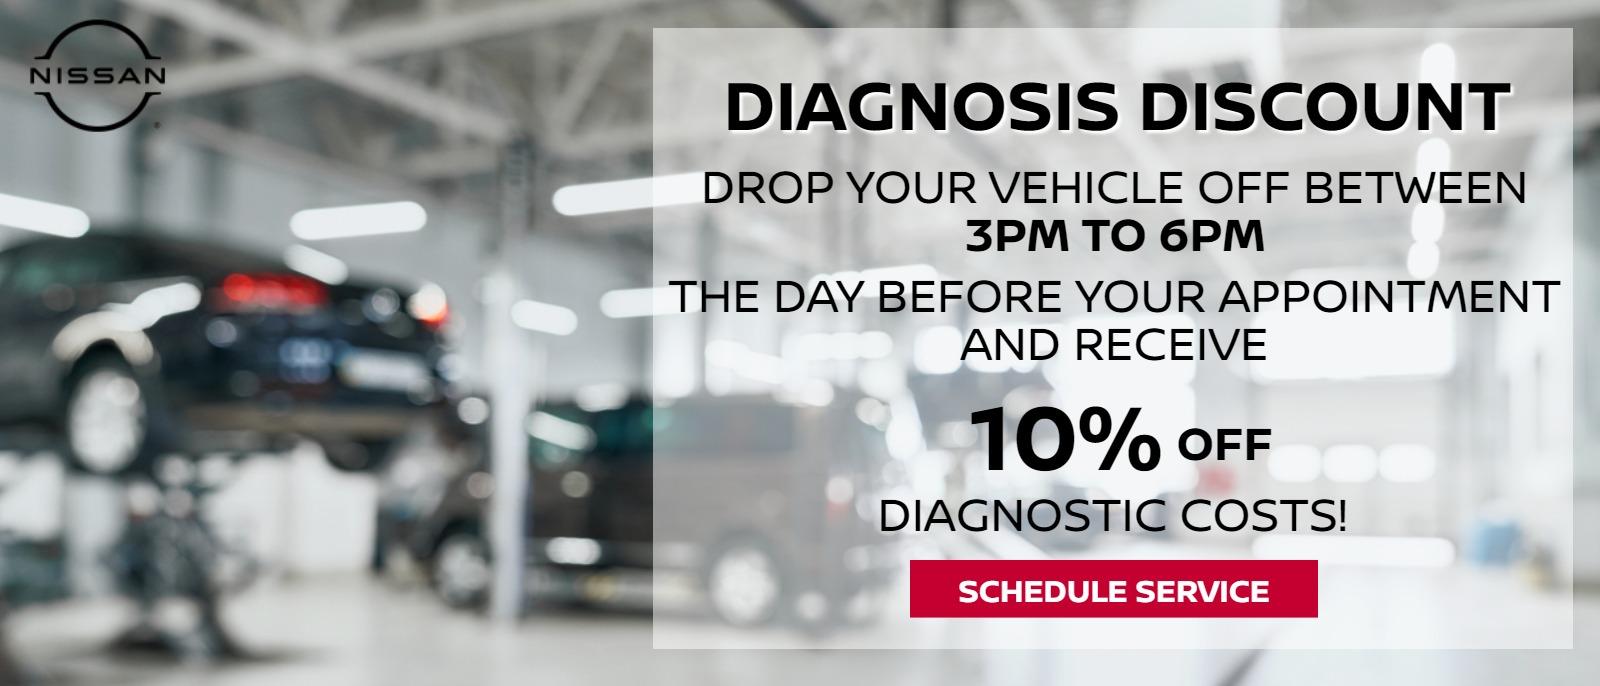 Diagnosis Discount
Drop your vehicle off
between 3pm - 6pm
the day before your appointment
and receive 10% off diagnostic costs!